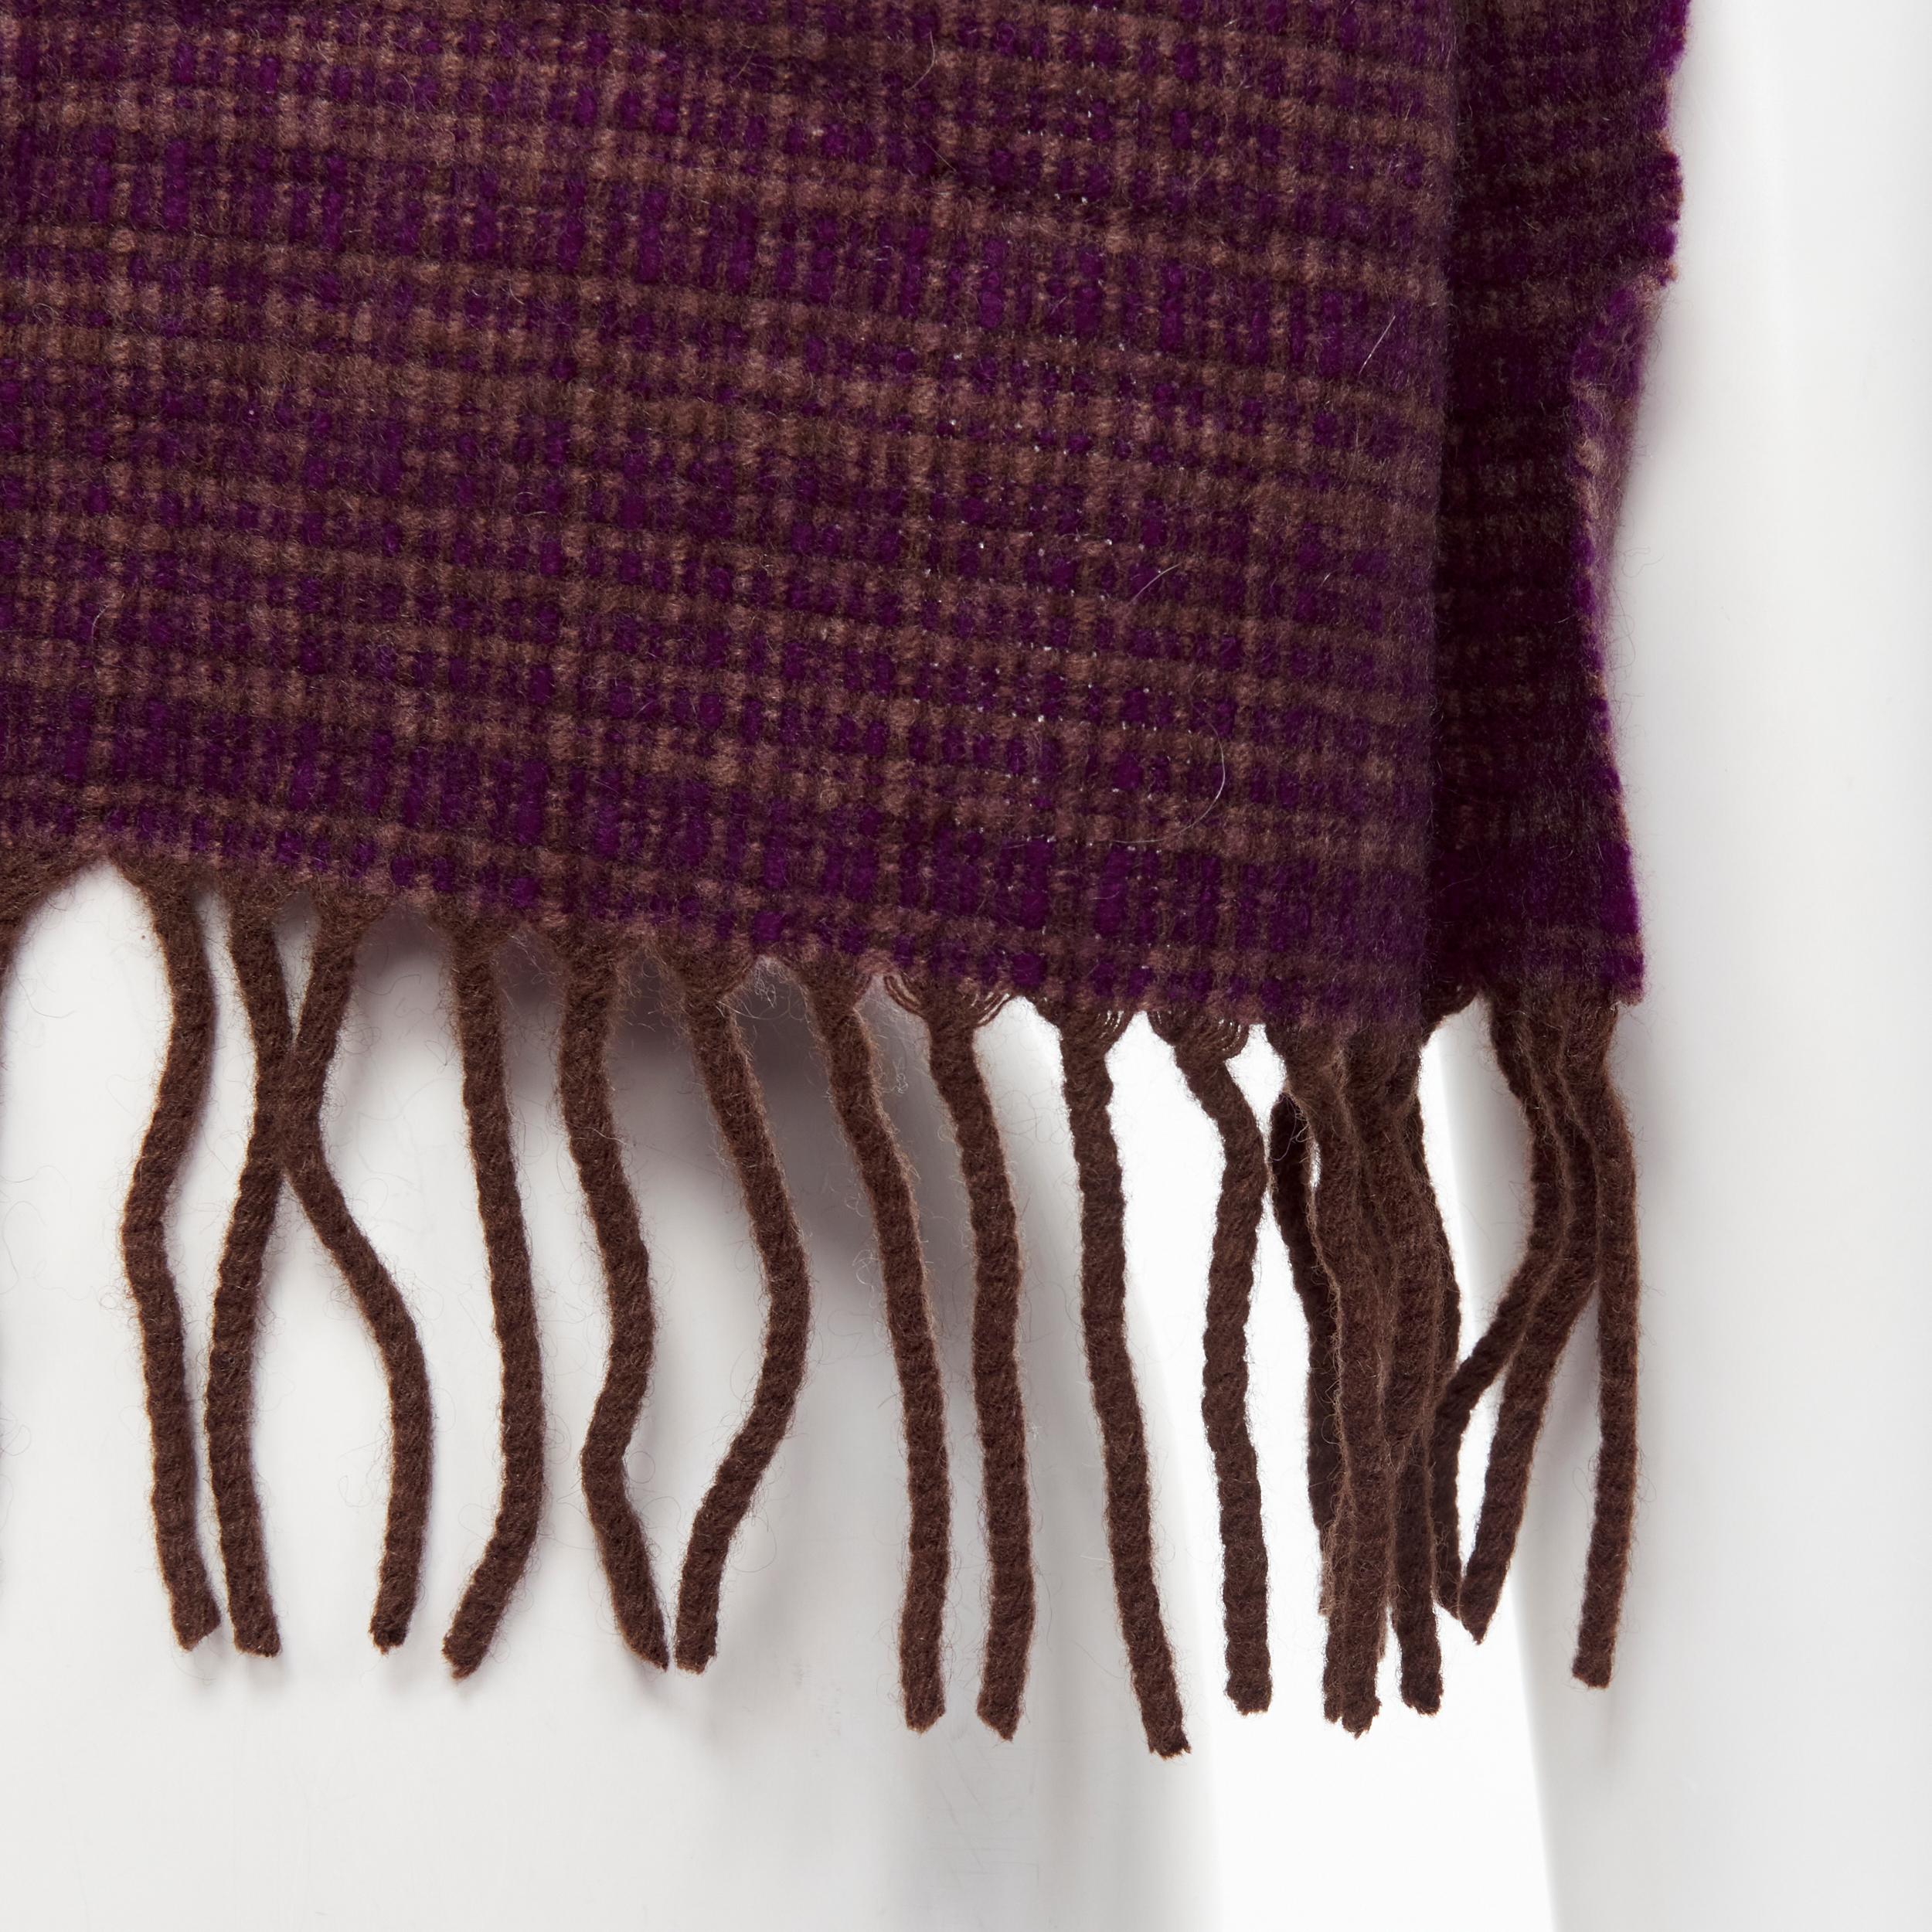 MAX MARA 100% cashmere brown purple woven tassel fringe scarf 
Reference: MAWG/A00074 
Brand: Max Mara 
Material: Cashmere 
Color: Purple 
Pattern: Check 
Made in: Italy 

CONDITION: 
Condition: Excellent, this item was pre-owned and is in excellent